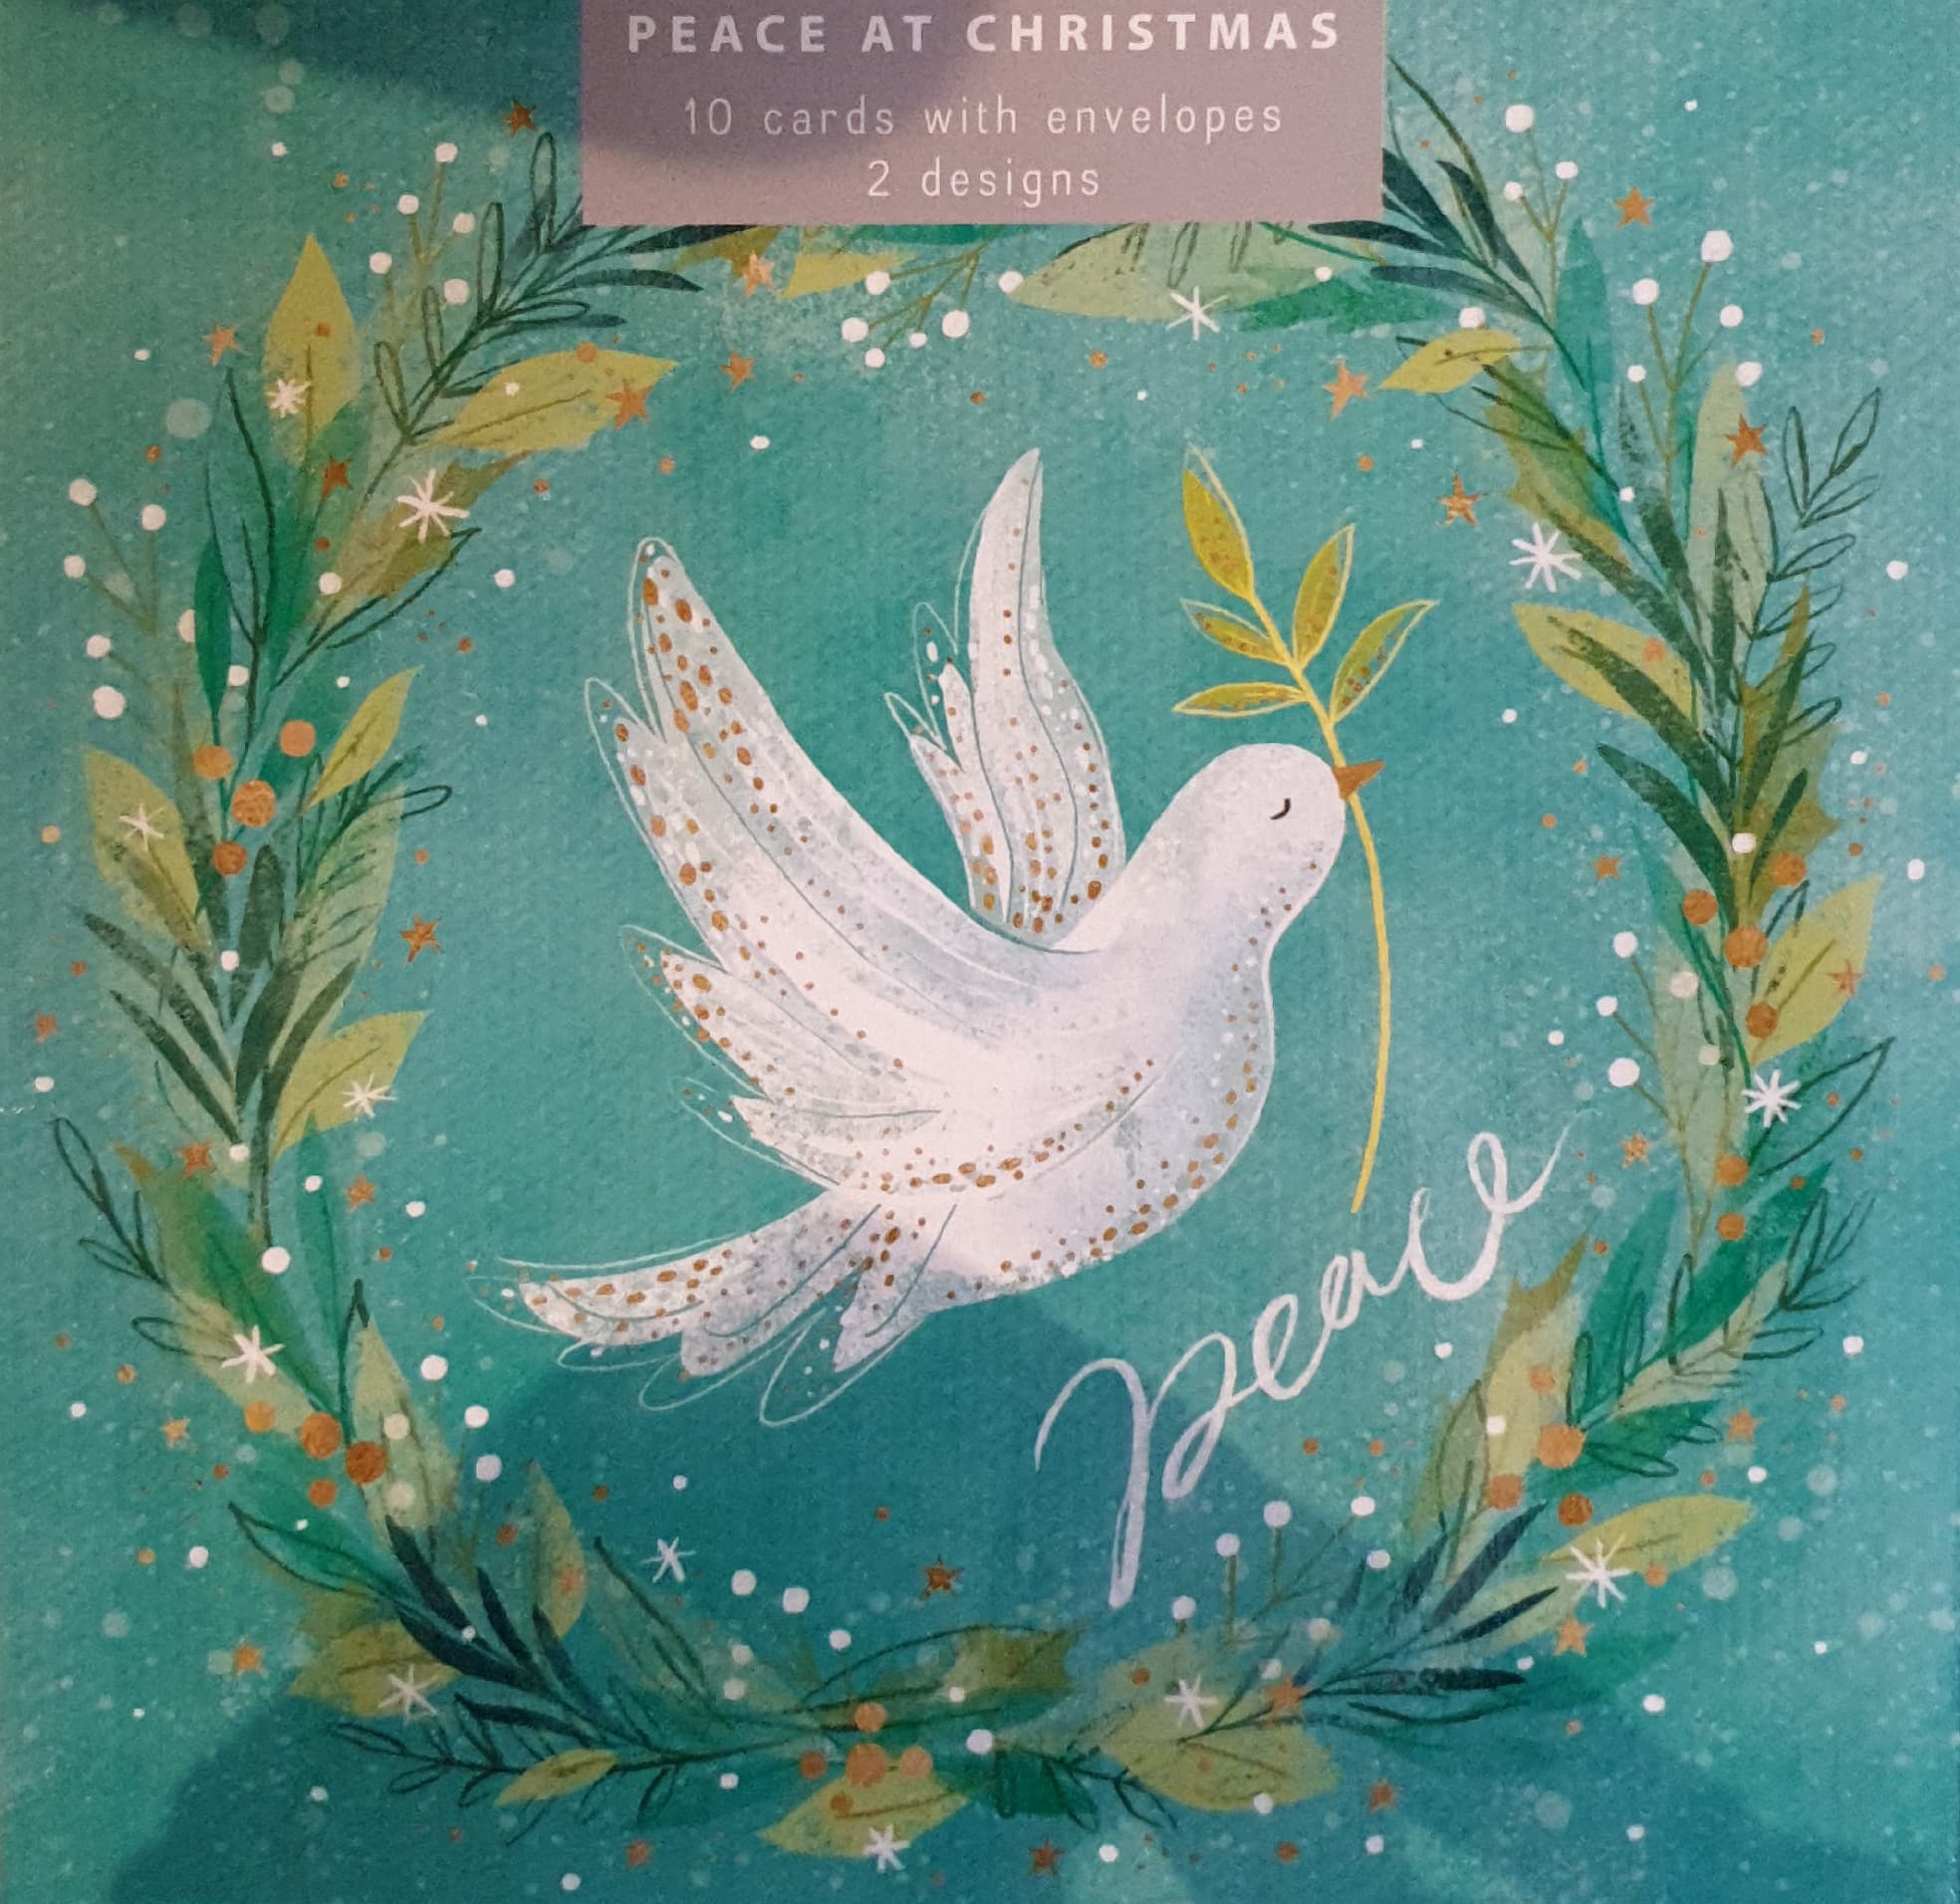 Charity Christmas Cards - 10 Cards with Envelopes / 2 Designs - Peace at Christmas